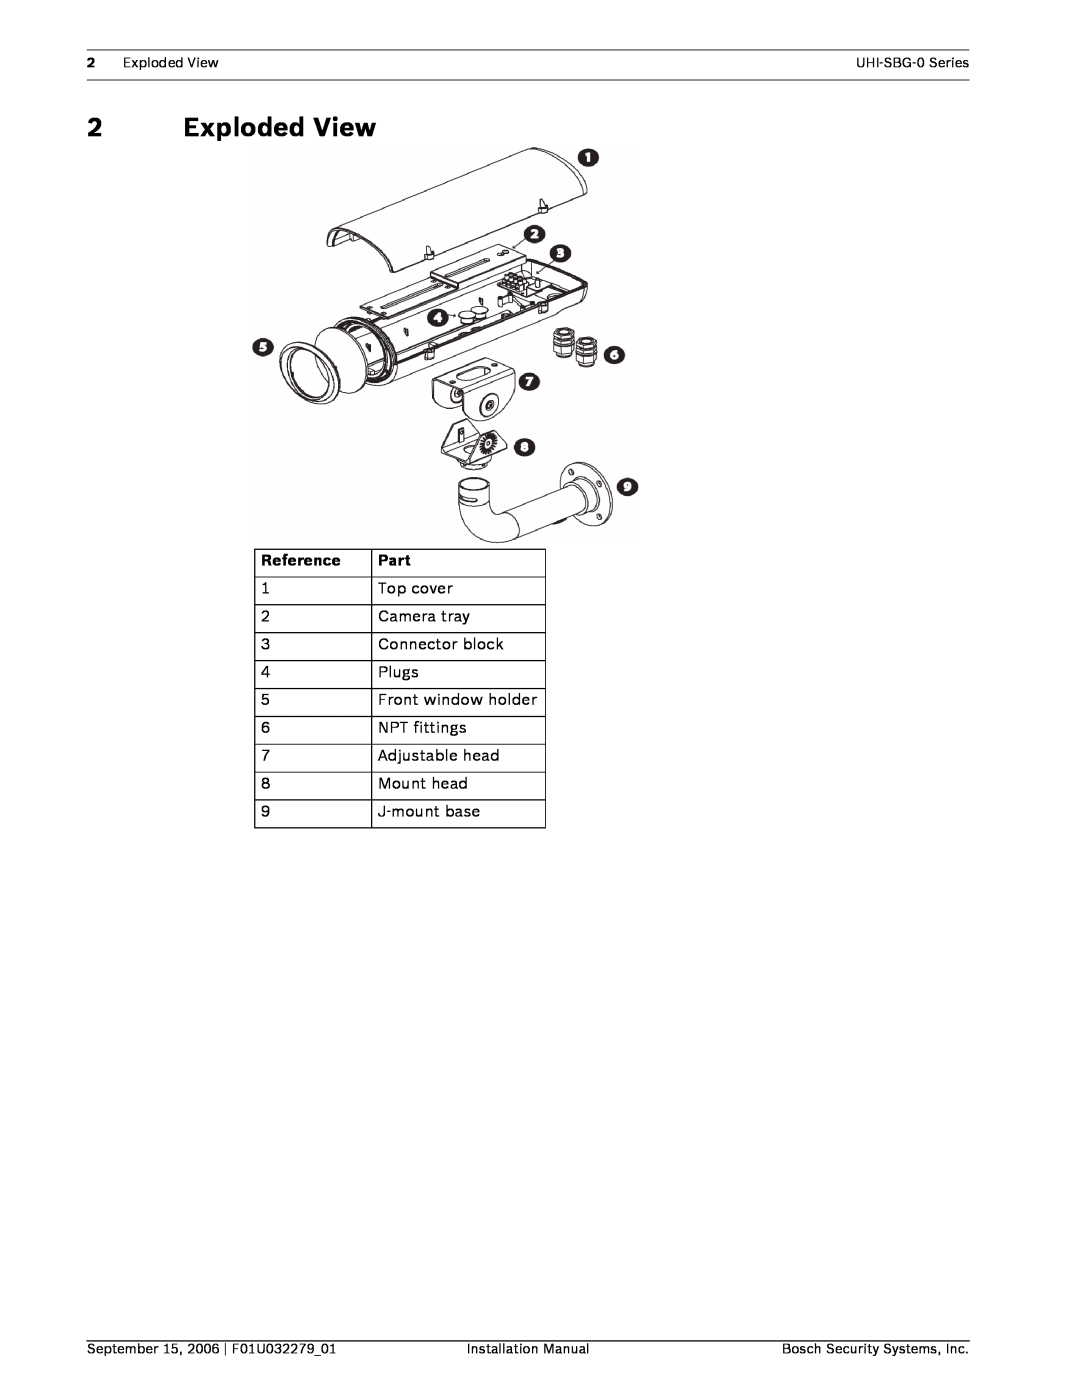 Bosch Appliances UHI-SBG-0 installation manual Exploded View, Reference, Part 